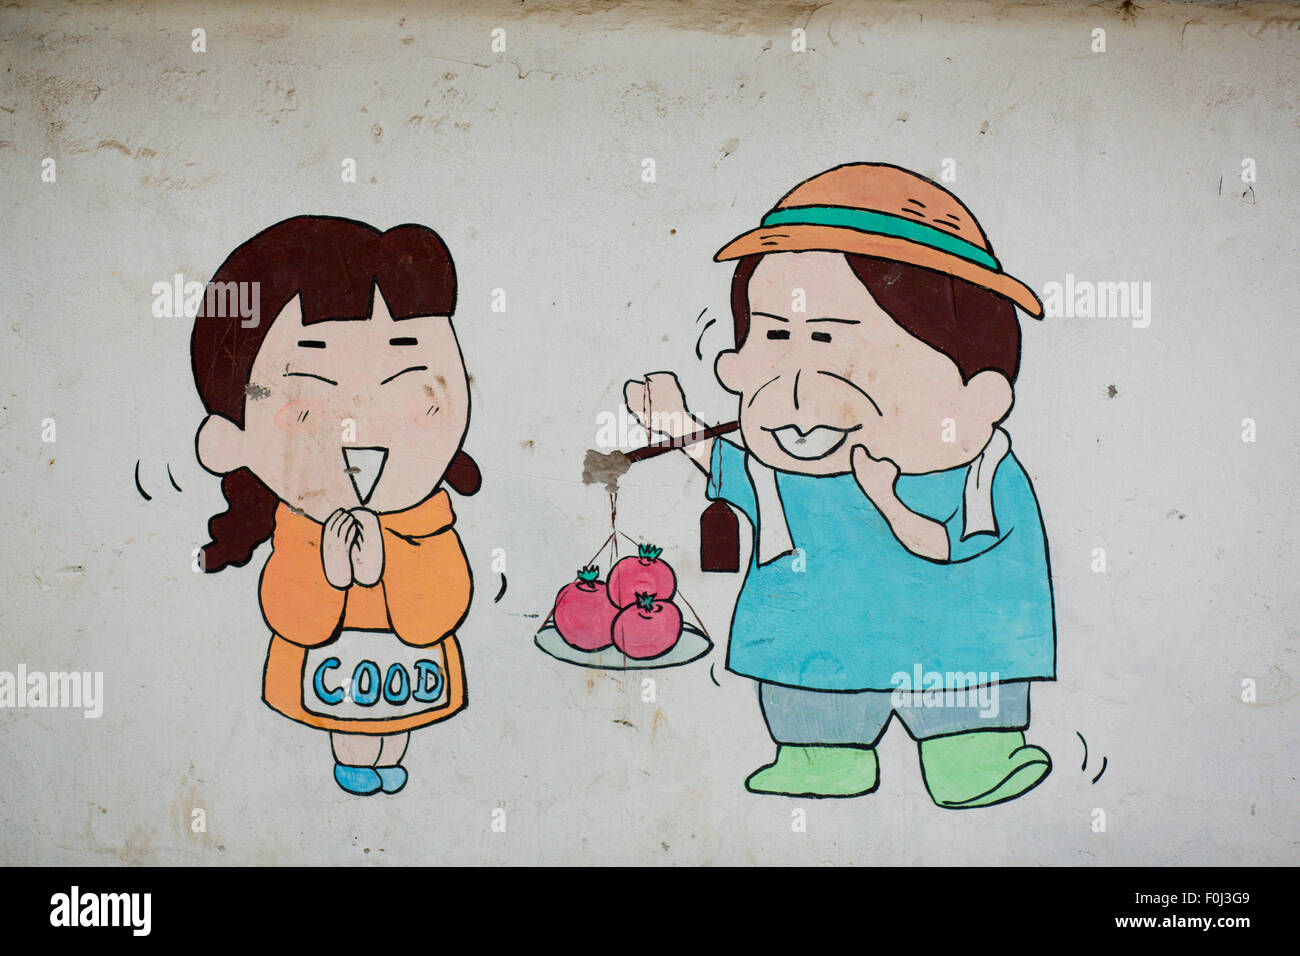 Funny chinese drawing, Hangzhou in China. Stock Photo